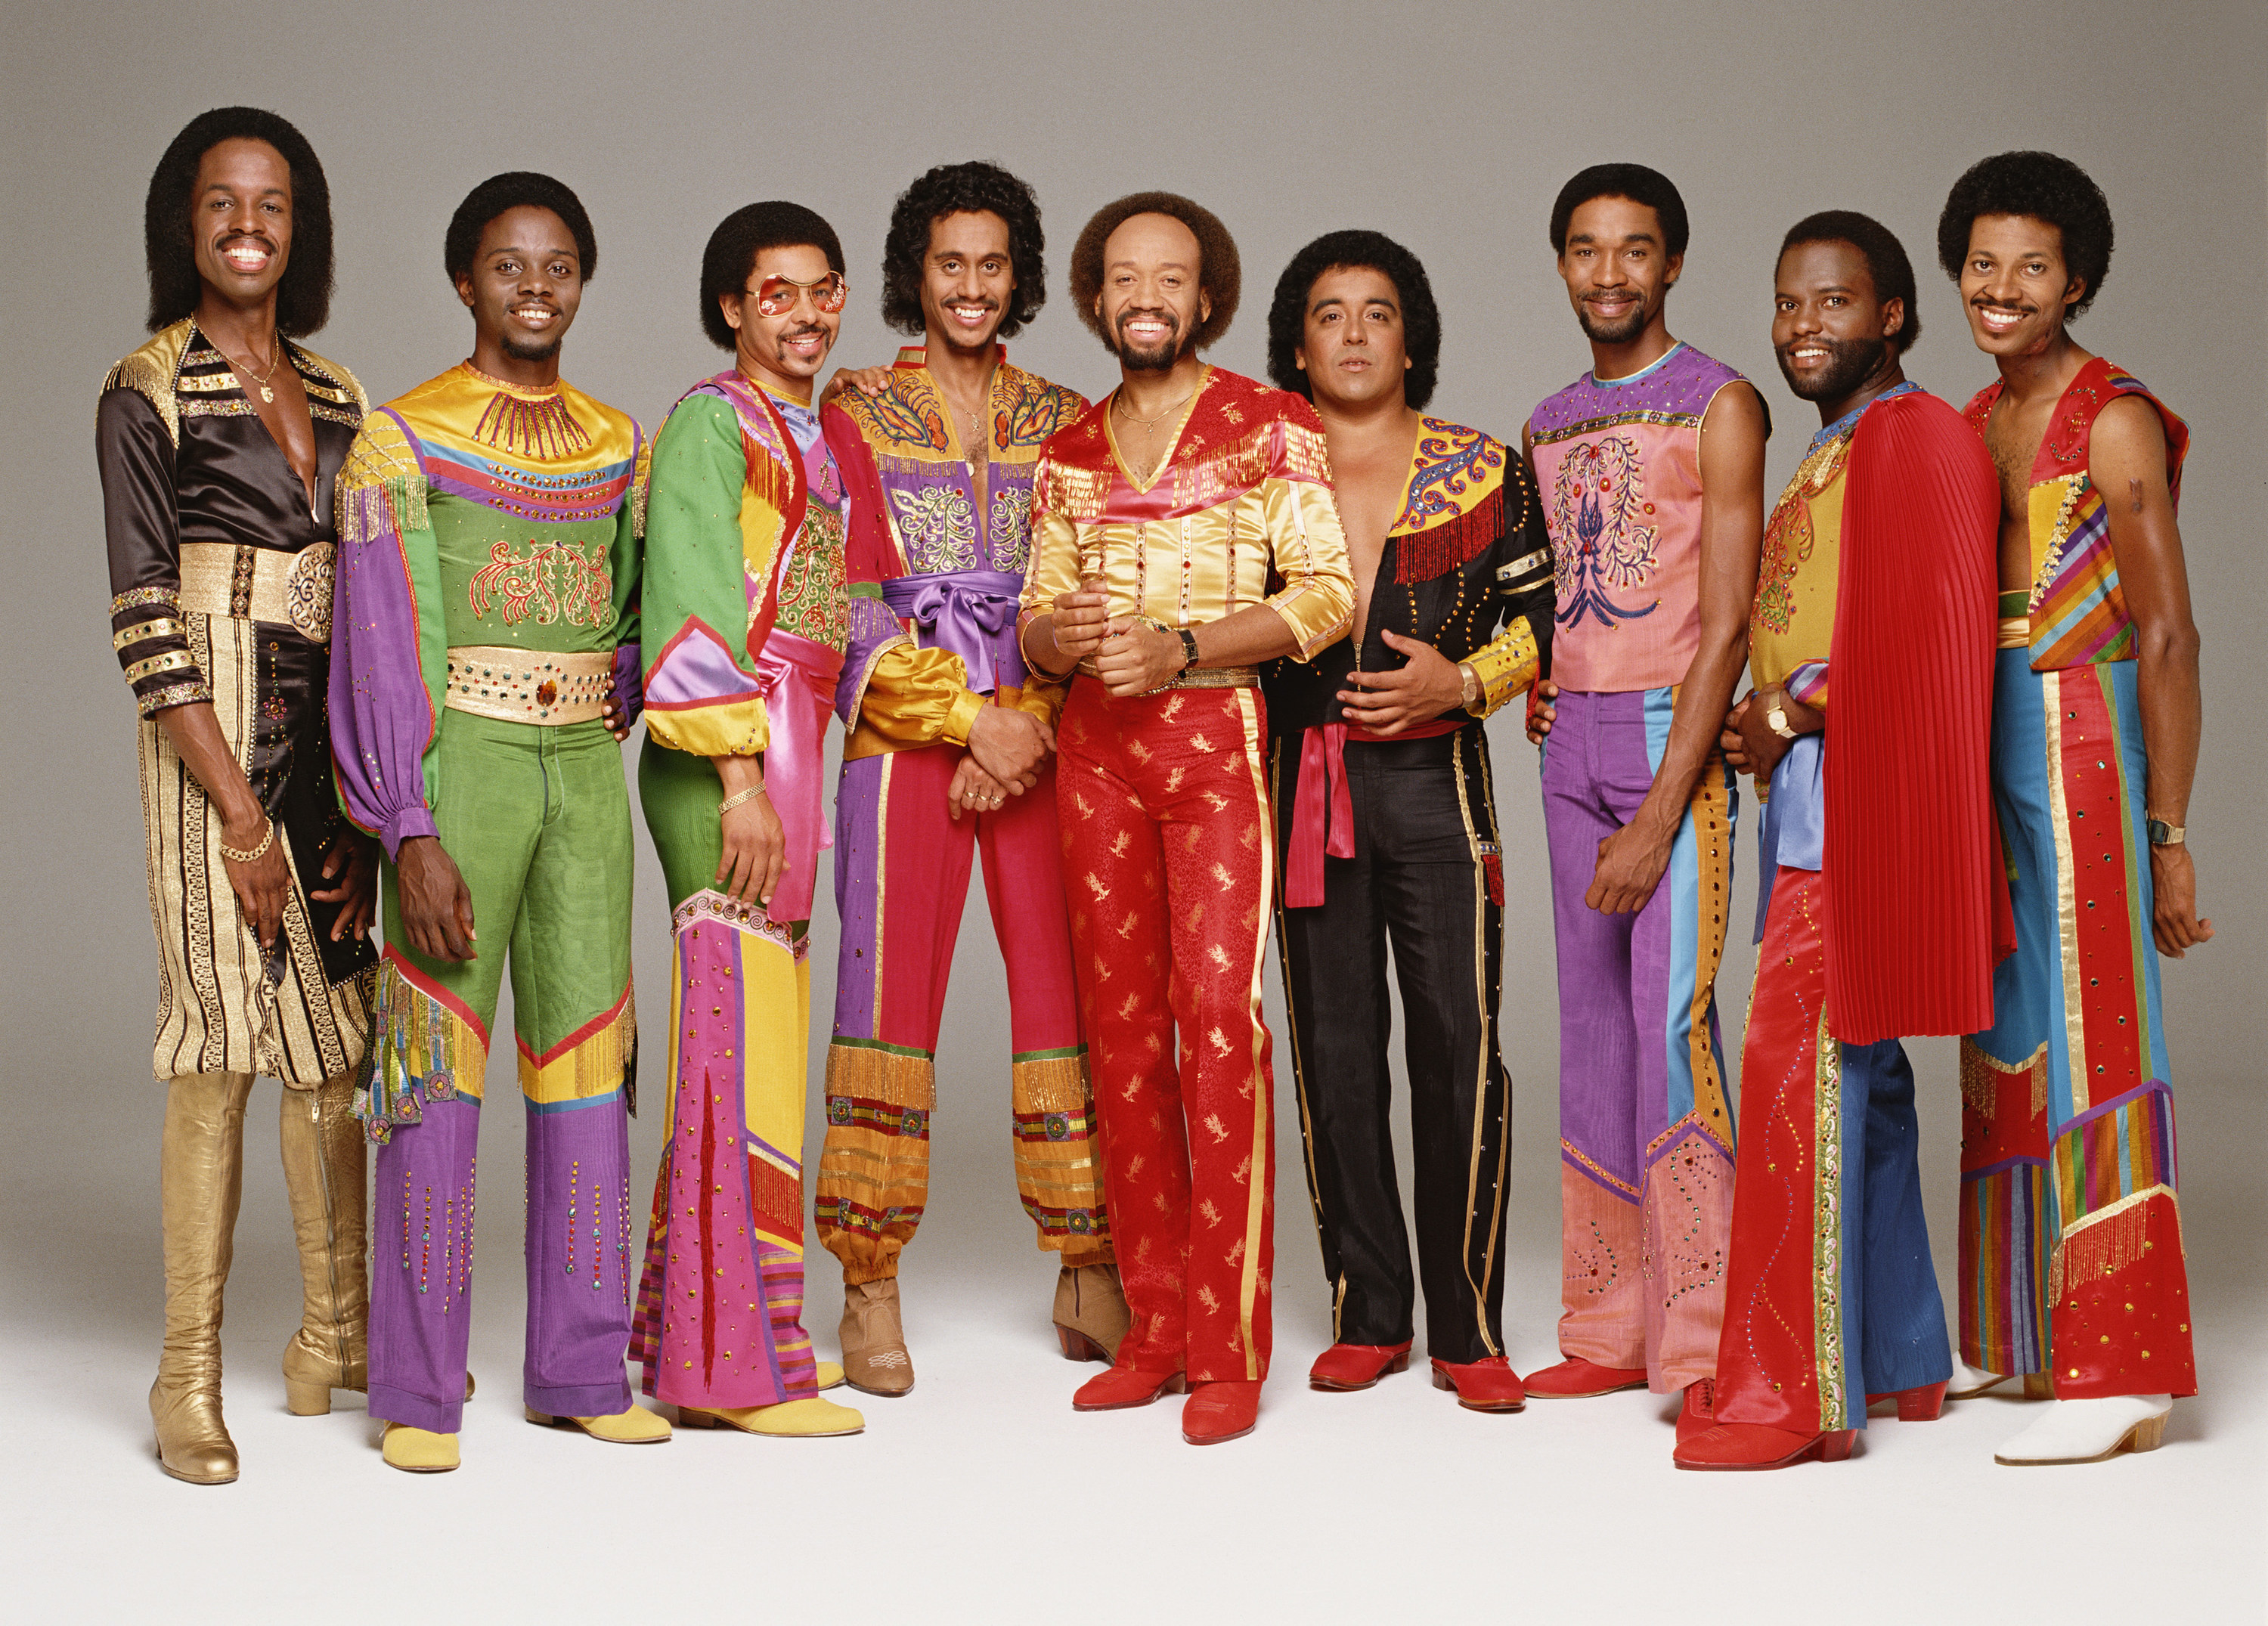 A group portrait of Earth Wind and Fire in costume